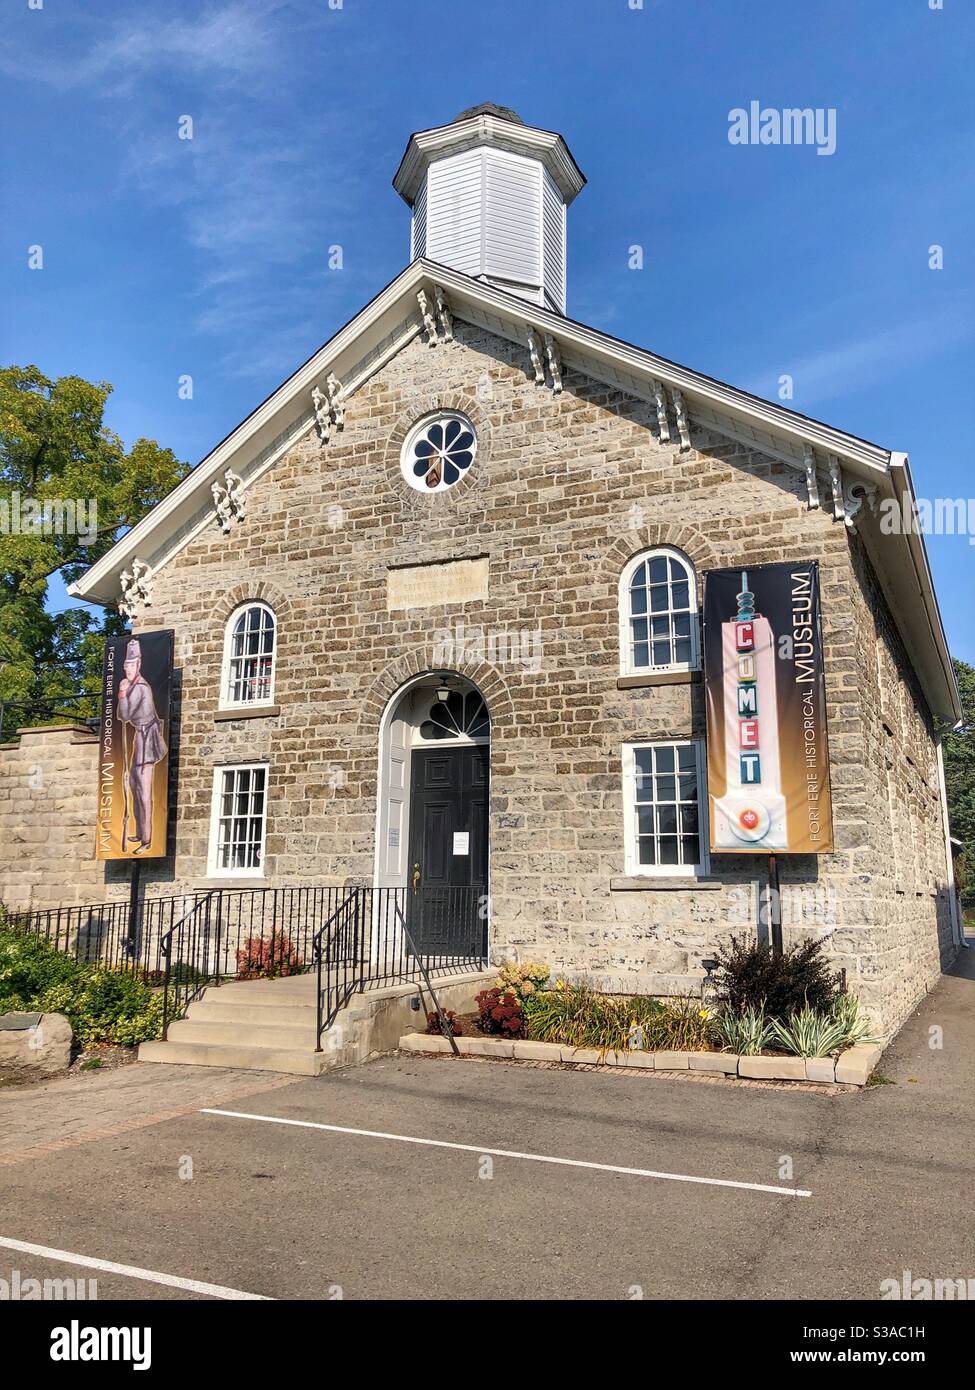 A museum housed in an historical colonial building in Ridgeway, Ontario, Canada. Stock Photo